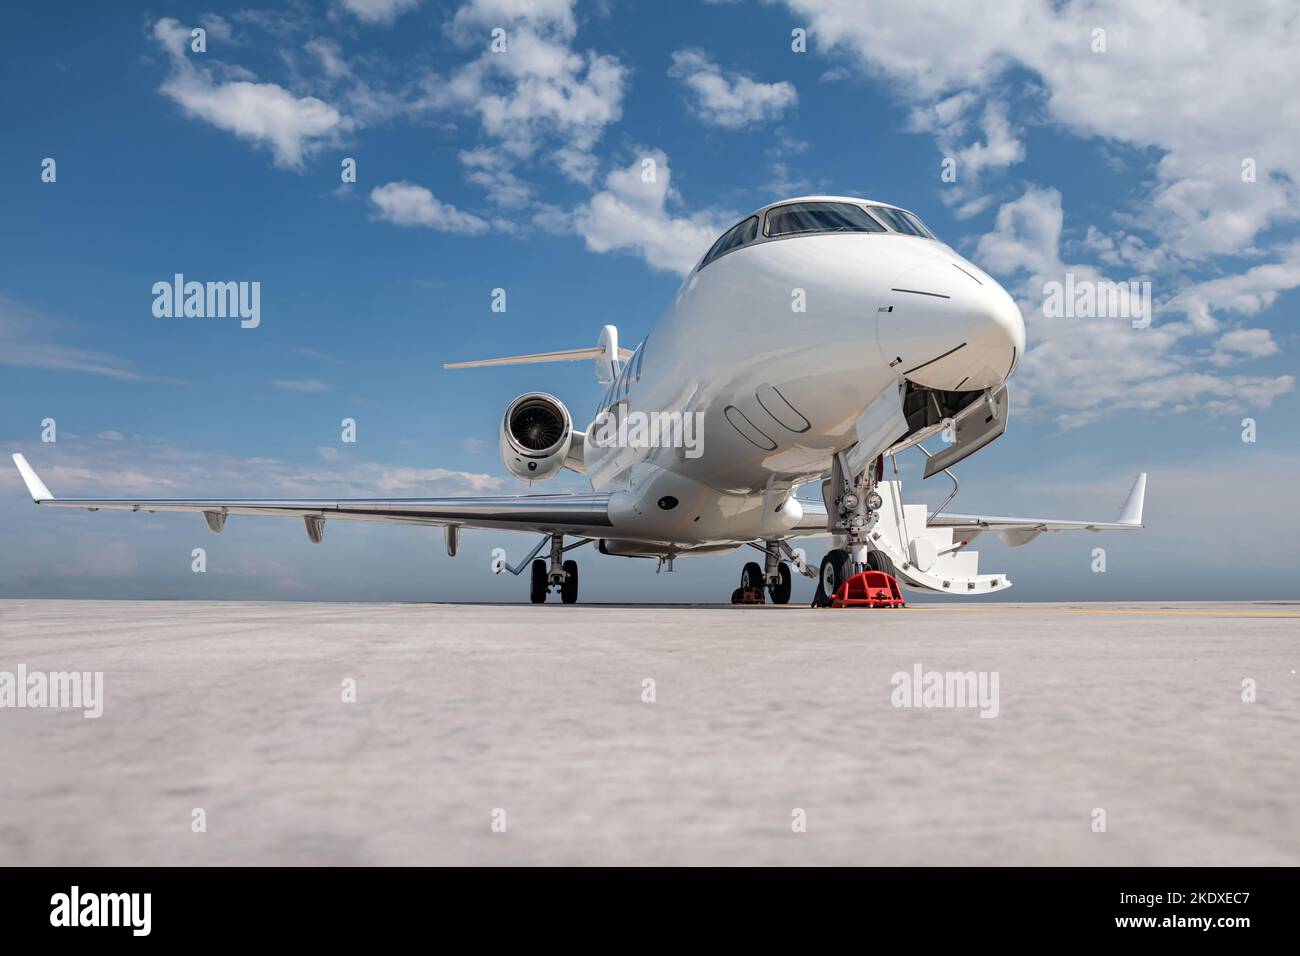 Modern white executive airplane with an opened gangway door at the airport apron Stock Photo